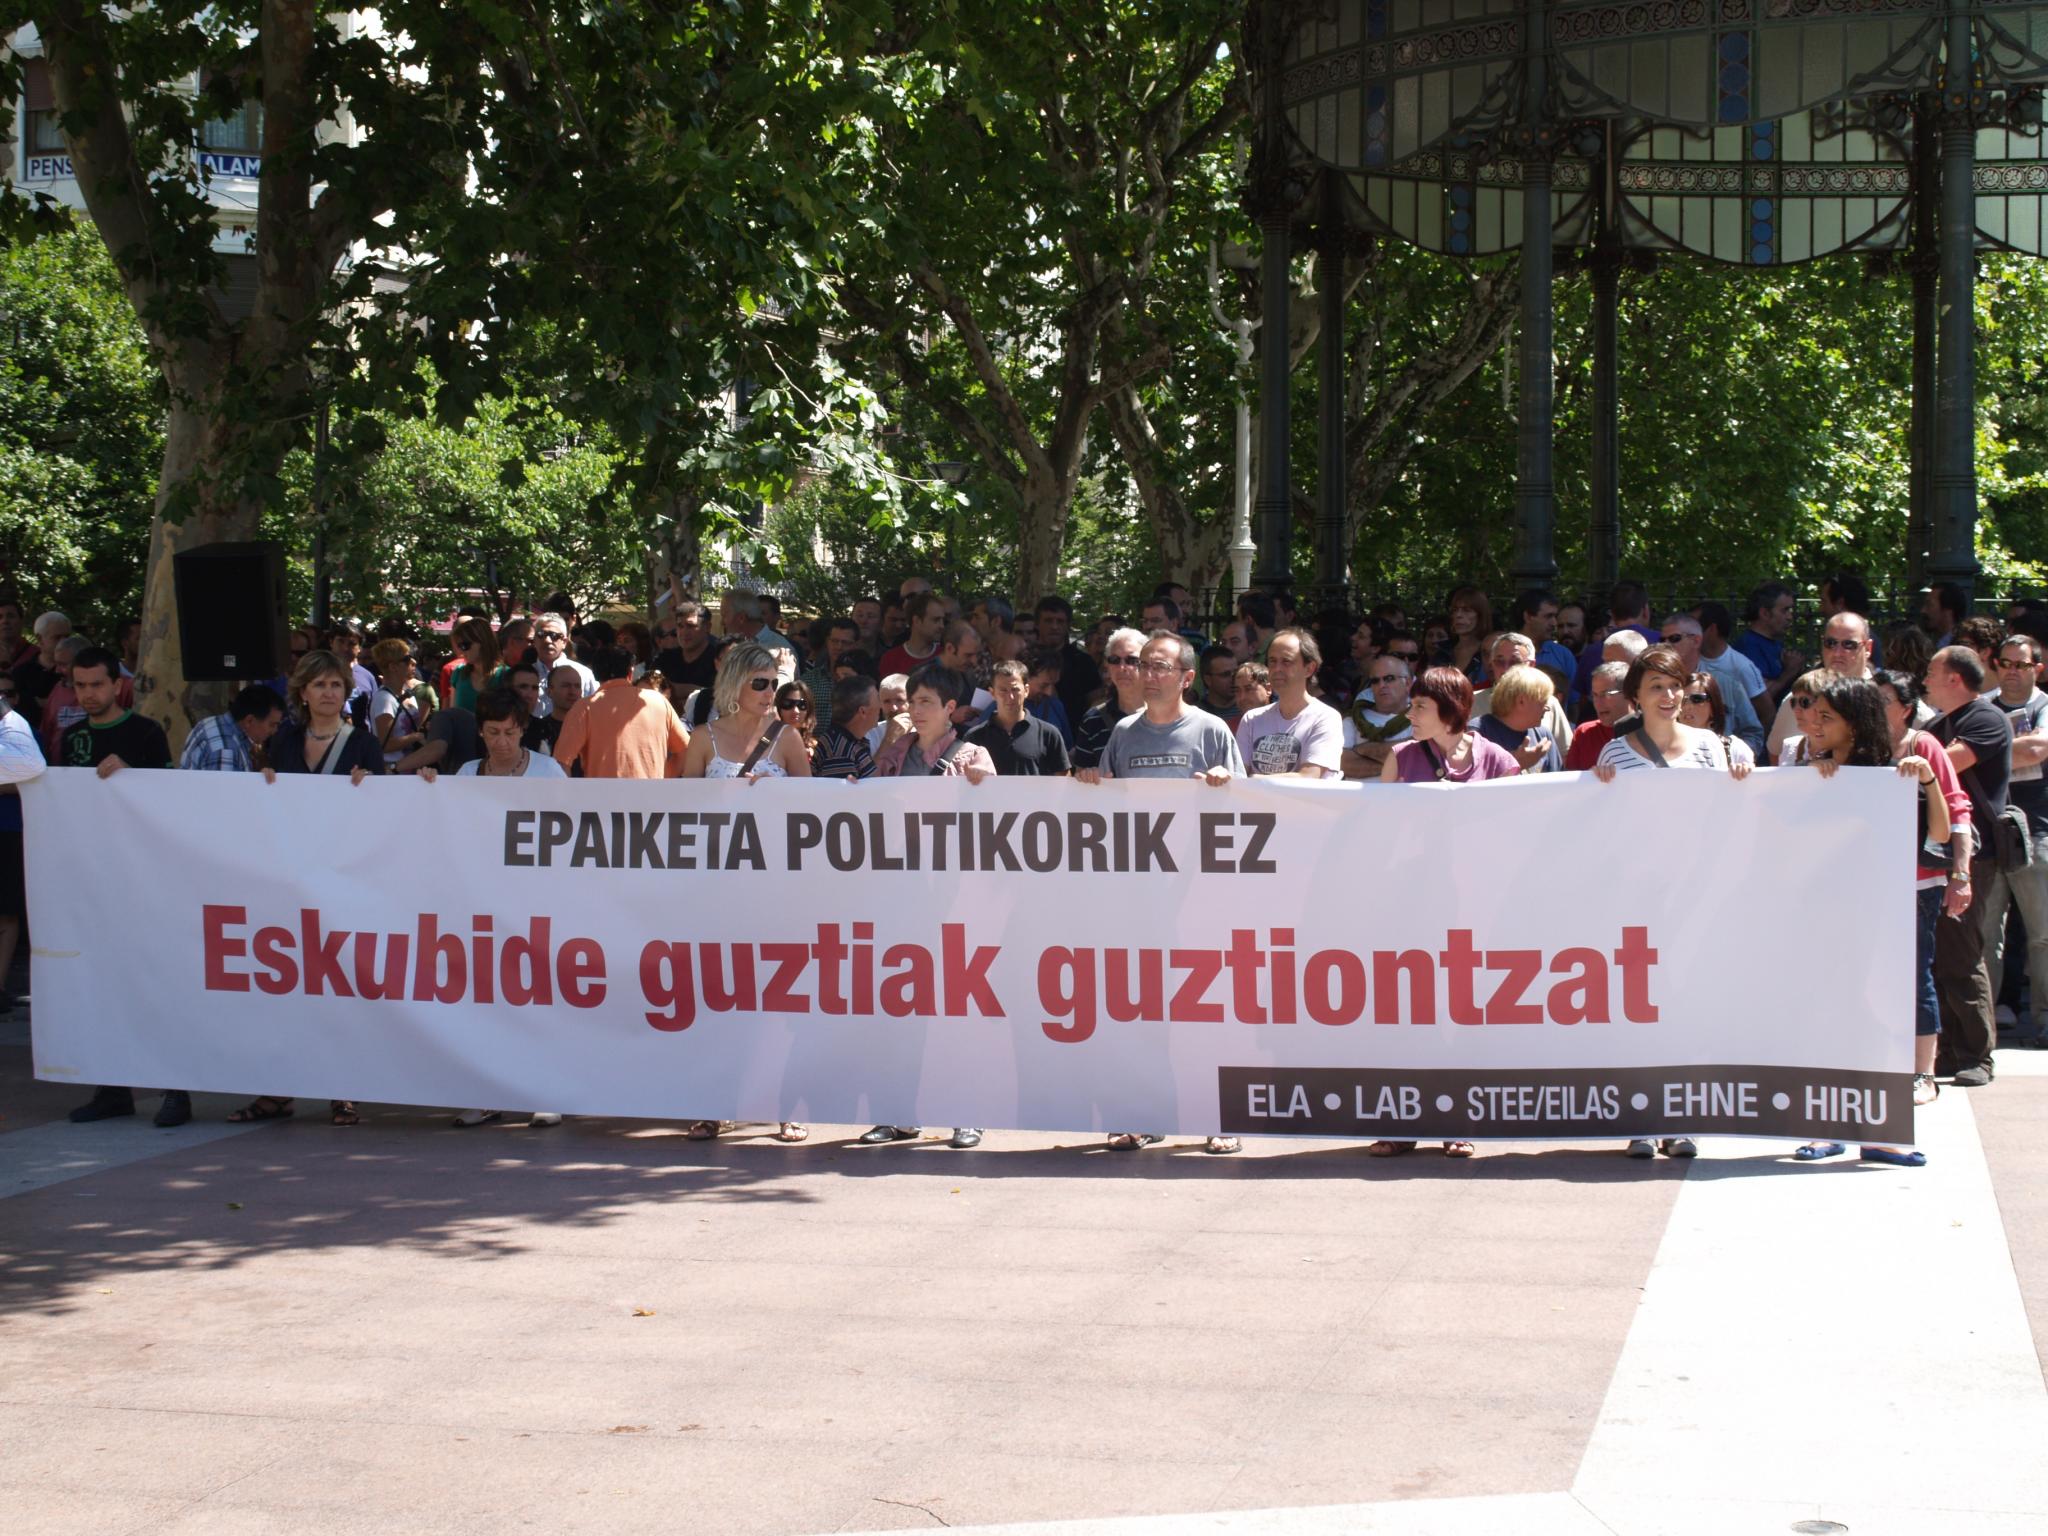 a man stands in front of an event while people hold up a white banner